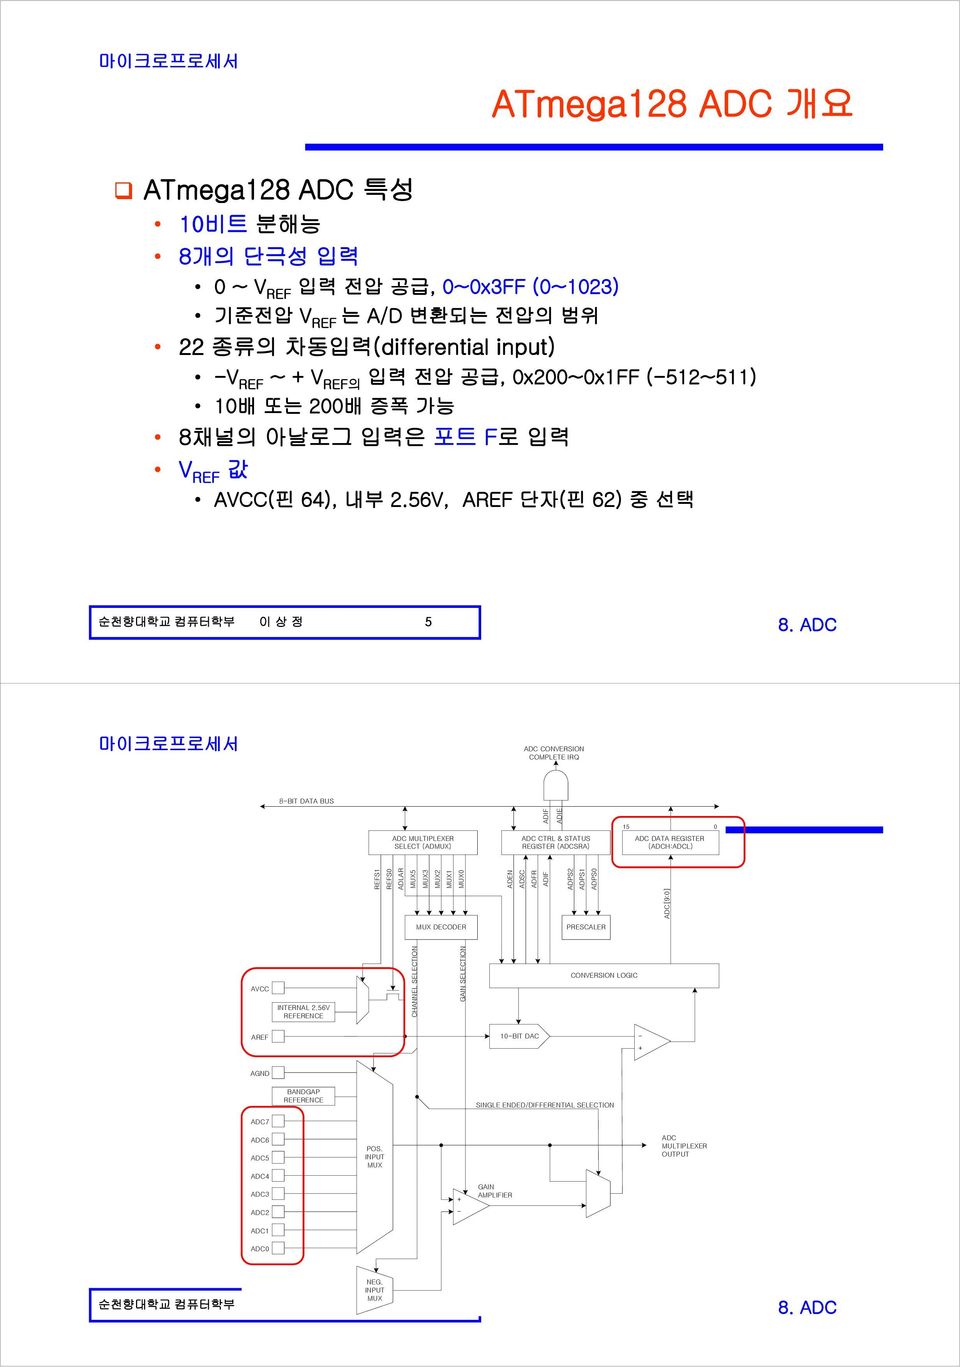 56V, AREF 단자(핀 62) 중 선택 순천향대학교 컴퓨터학부 이 상 정 5 ADC CONVERSION COMPLETE IRQ 8-BIT DATA BUS ADC MULTIPLEXER SELECT (ADMUX) ADC CTRL & STATUS REGISTER (ADCSRA) 5 0 ADC DATA REGISTER (ADCH:ADCL) REFS S